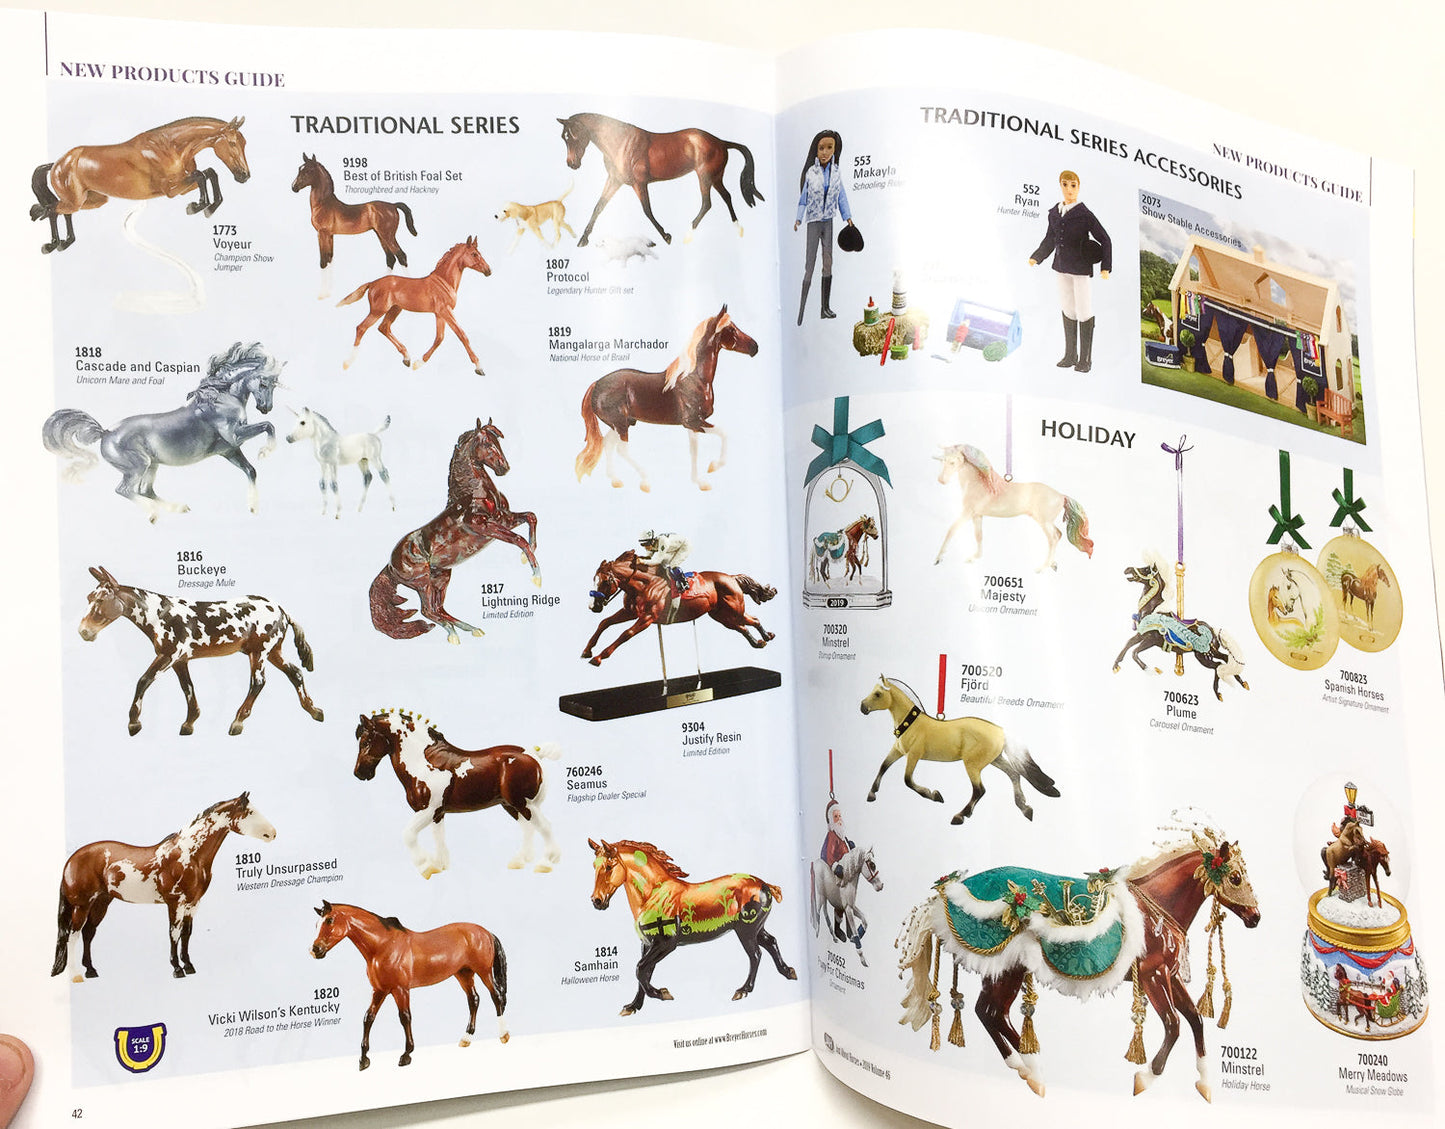 Just About Horses Magazine Vol. 46, 2019 Annual